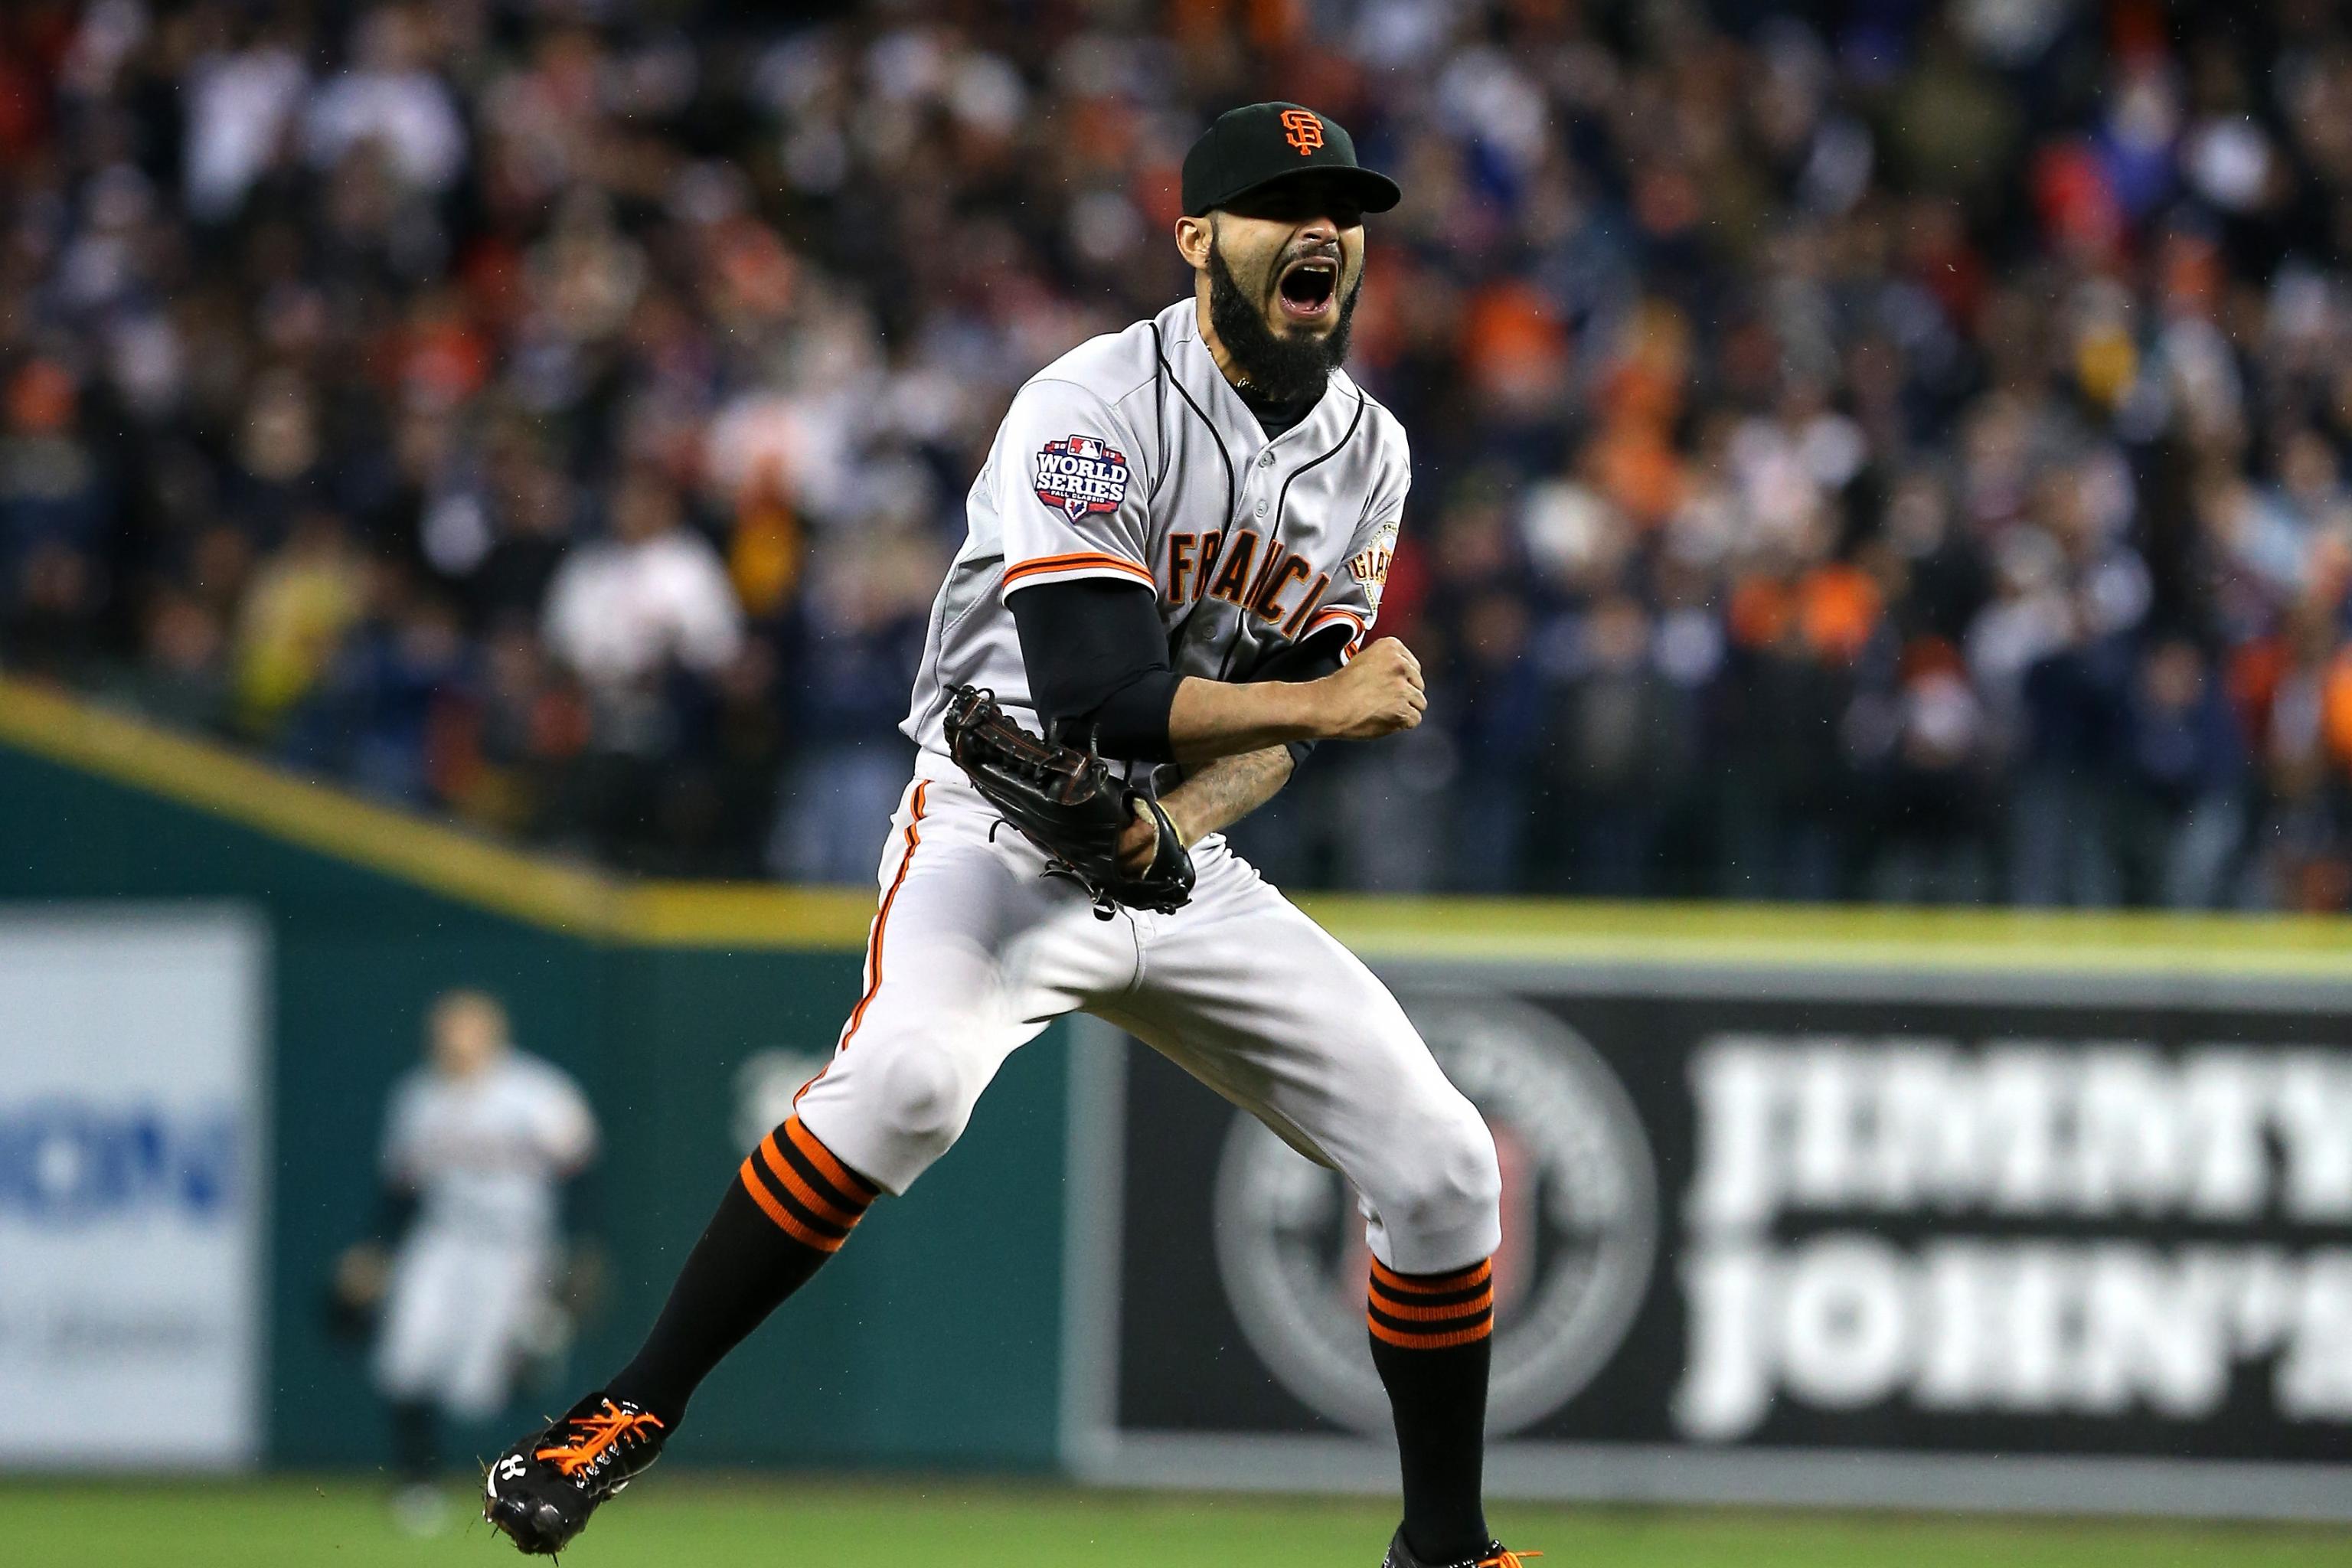 Sergio Romo is really going to the Dodgers - McCovey Chronicles